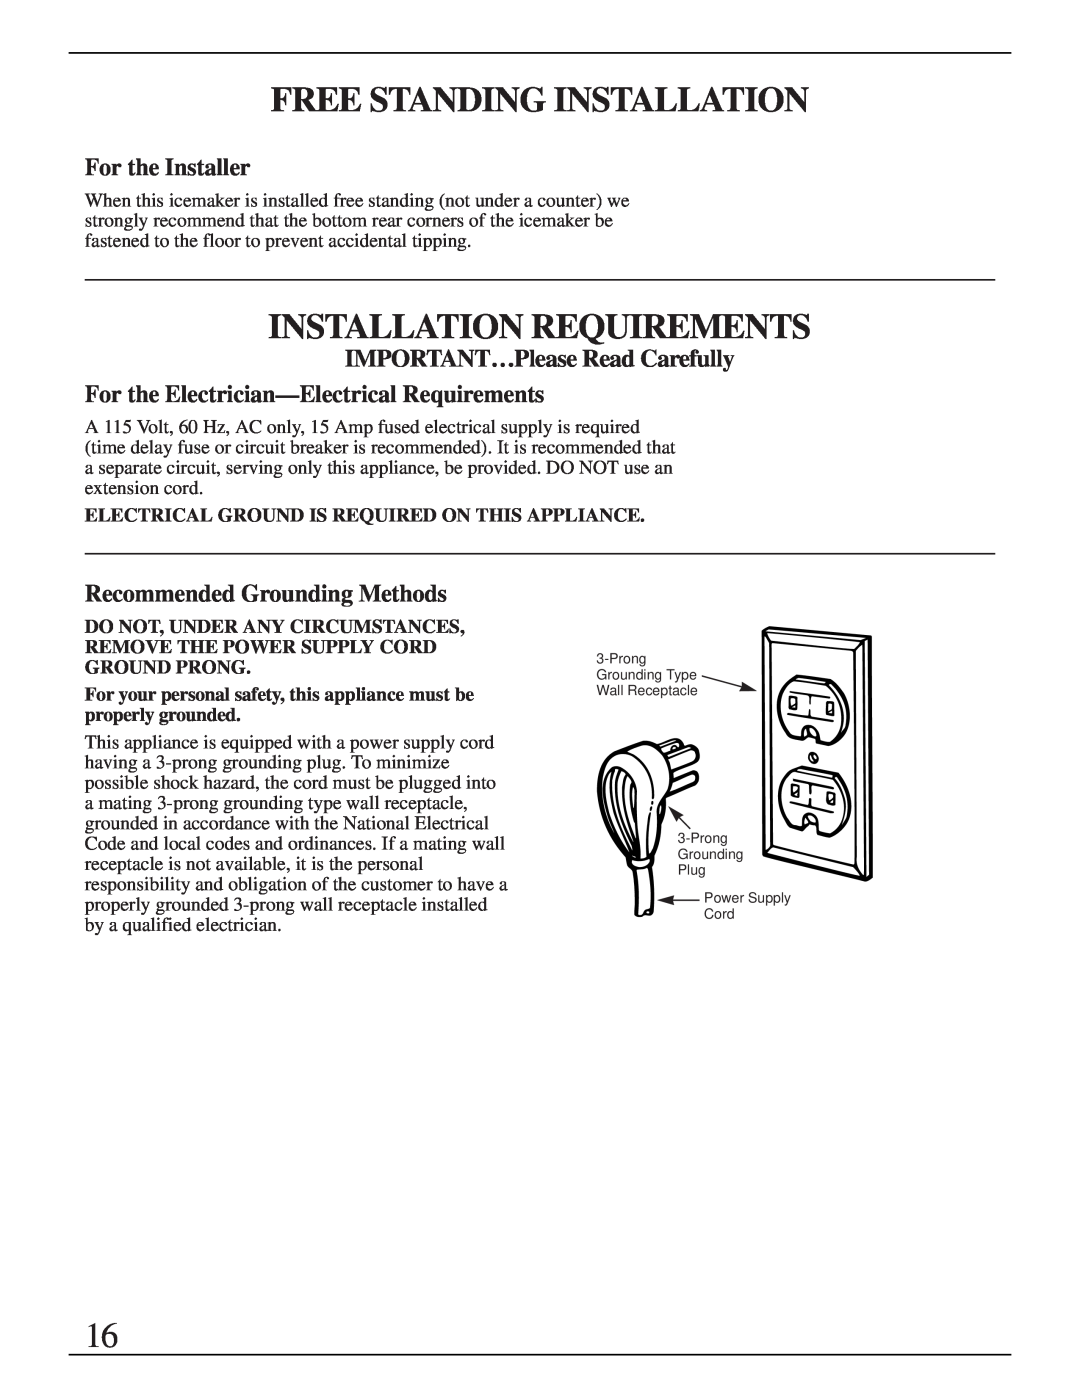 GE Monogram ZDIB50 Free Standing Installation, Installation Requirements, For the Installer, Recommended Grounding Methods 